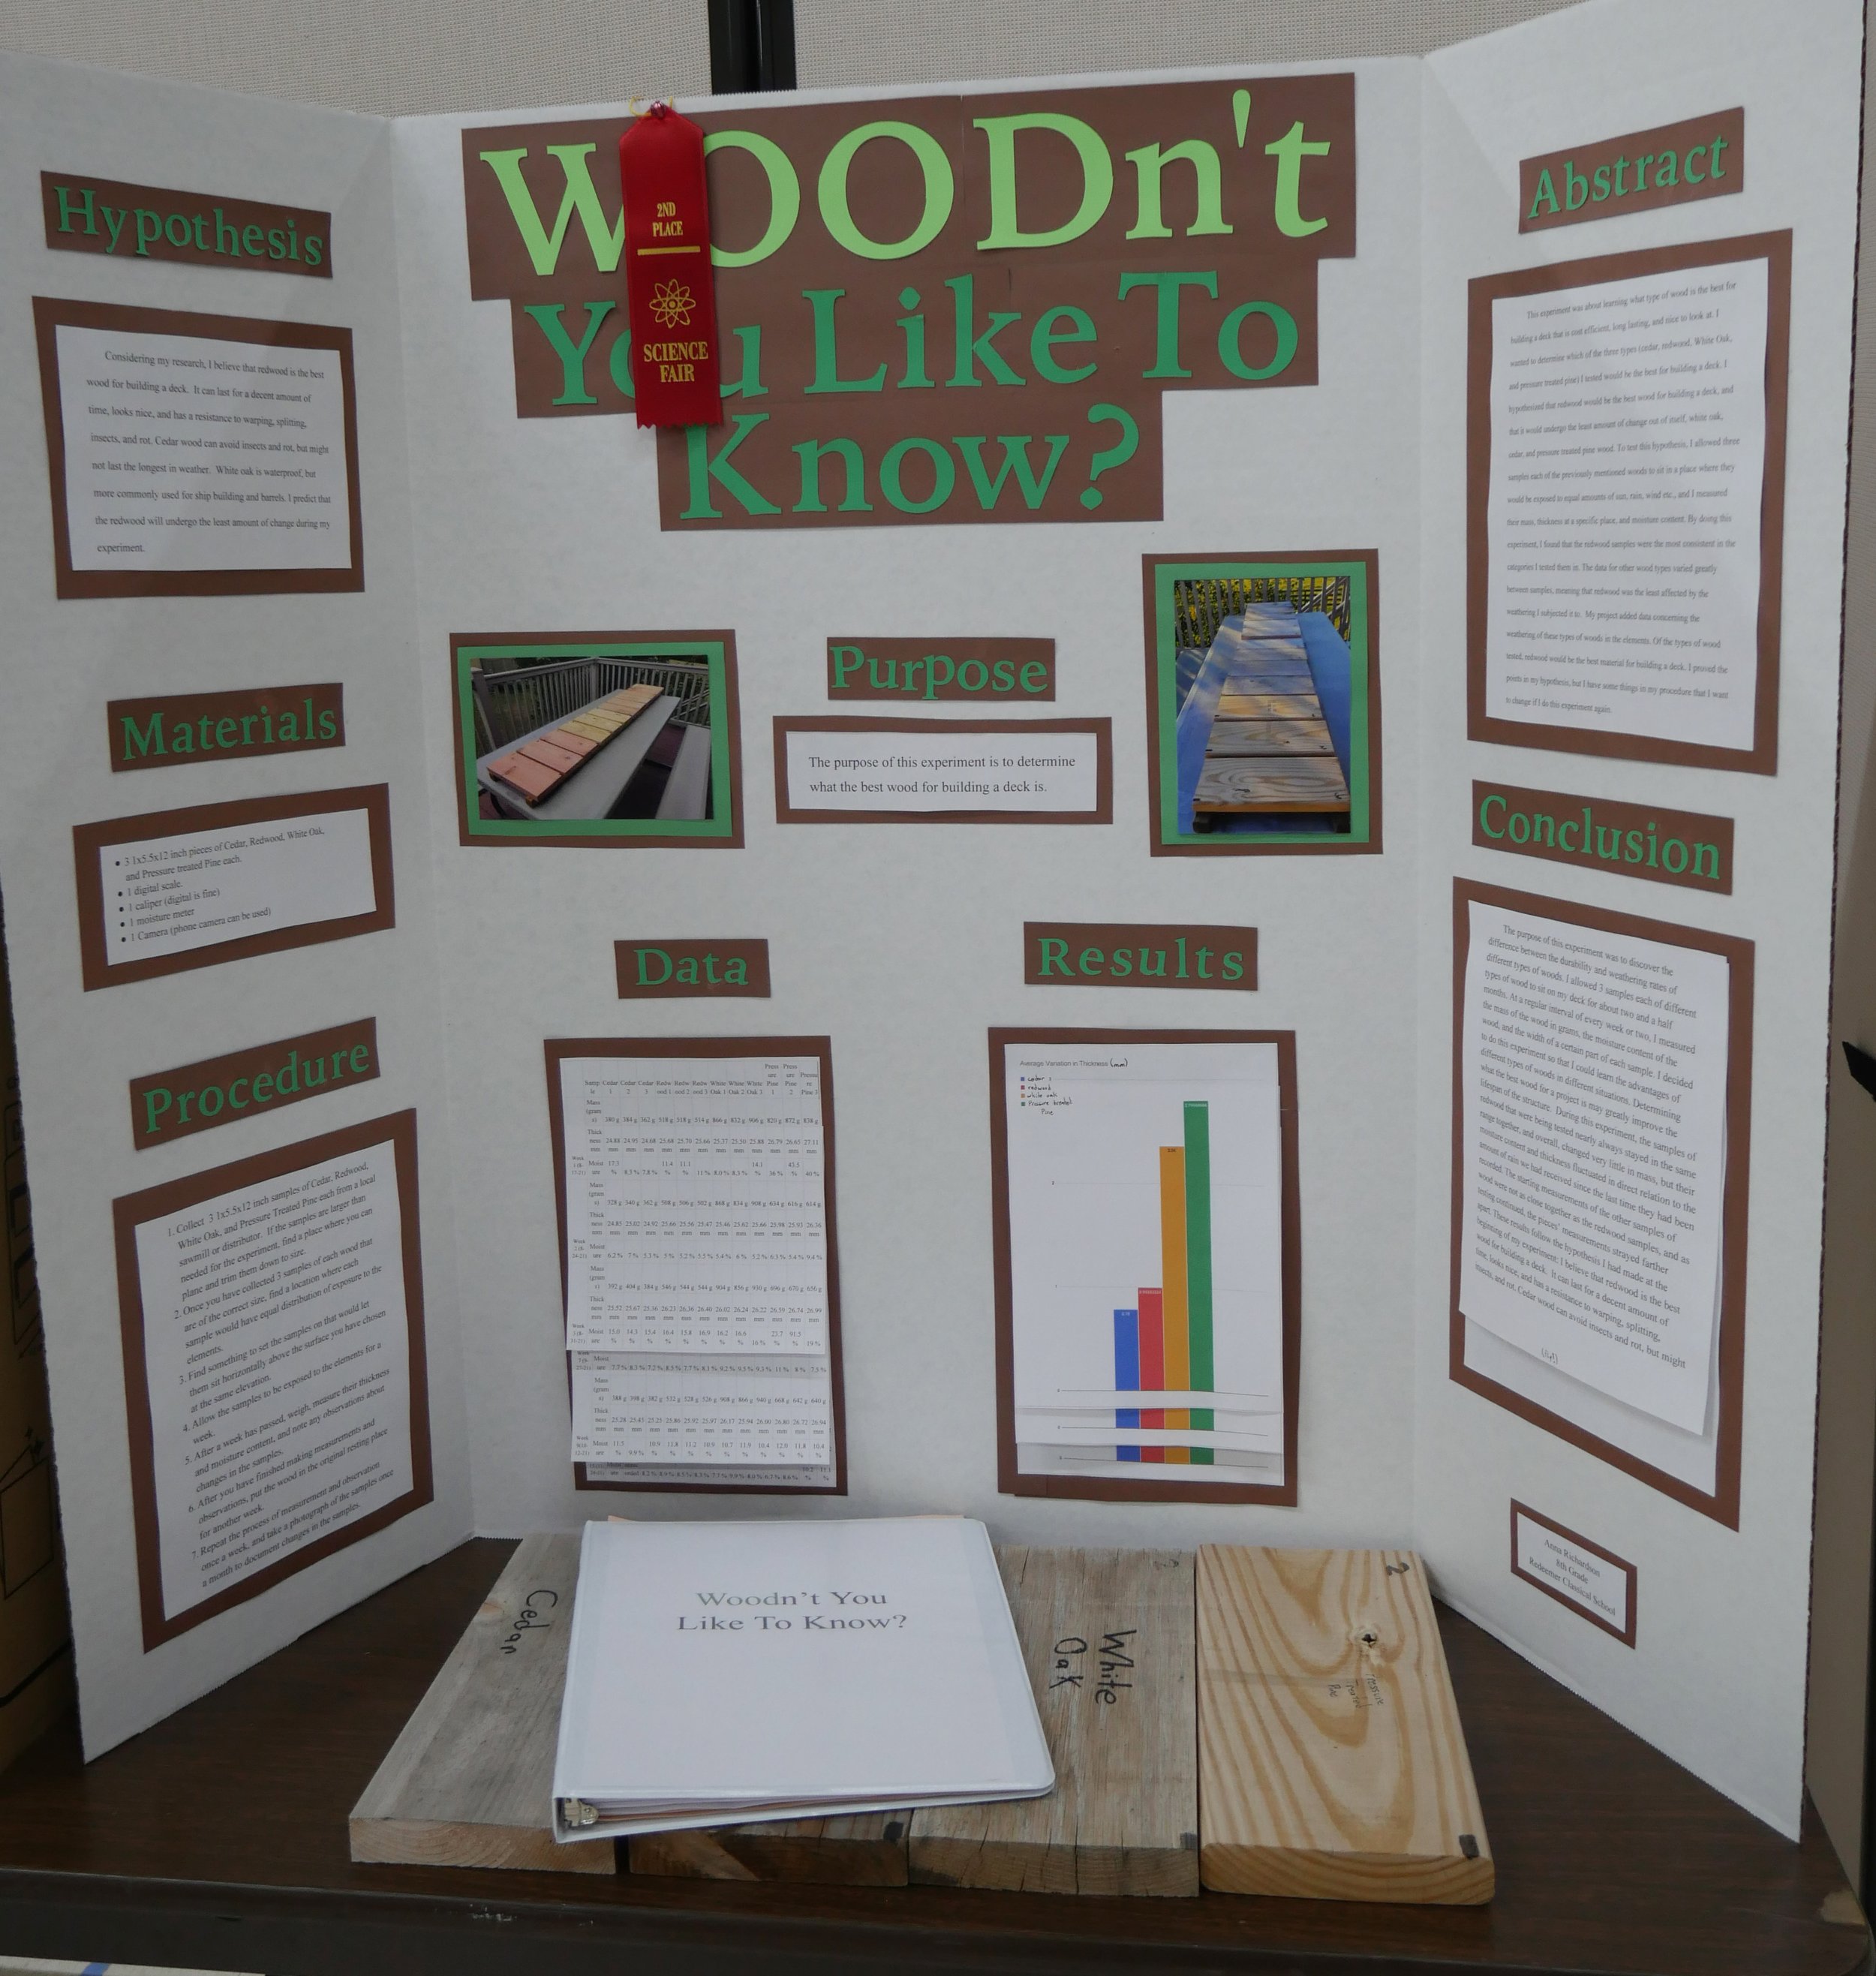  2nd Place  |  Earth and Environmental Science: Anna Richardson, “WOODn’t You Like To Know?” 